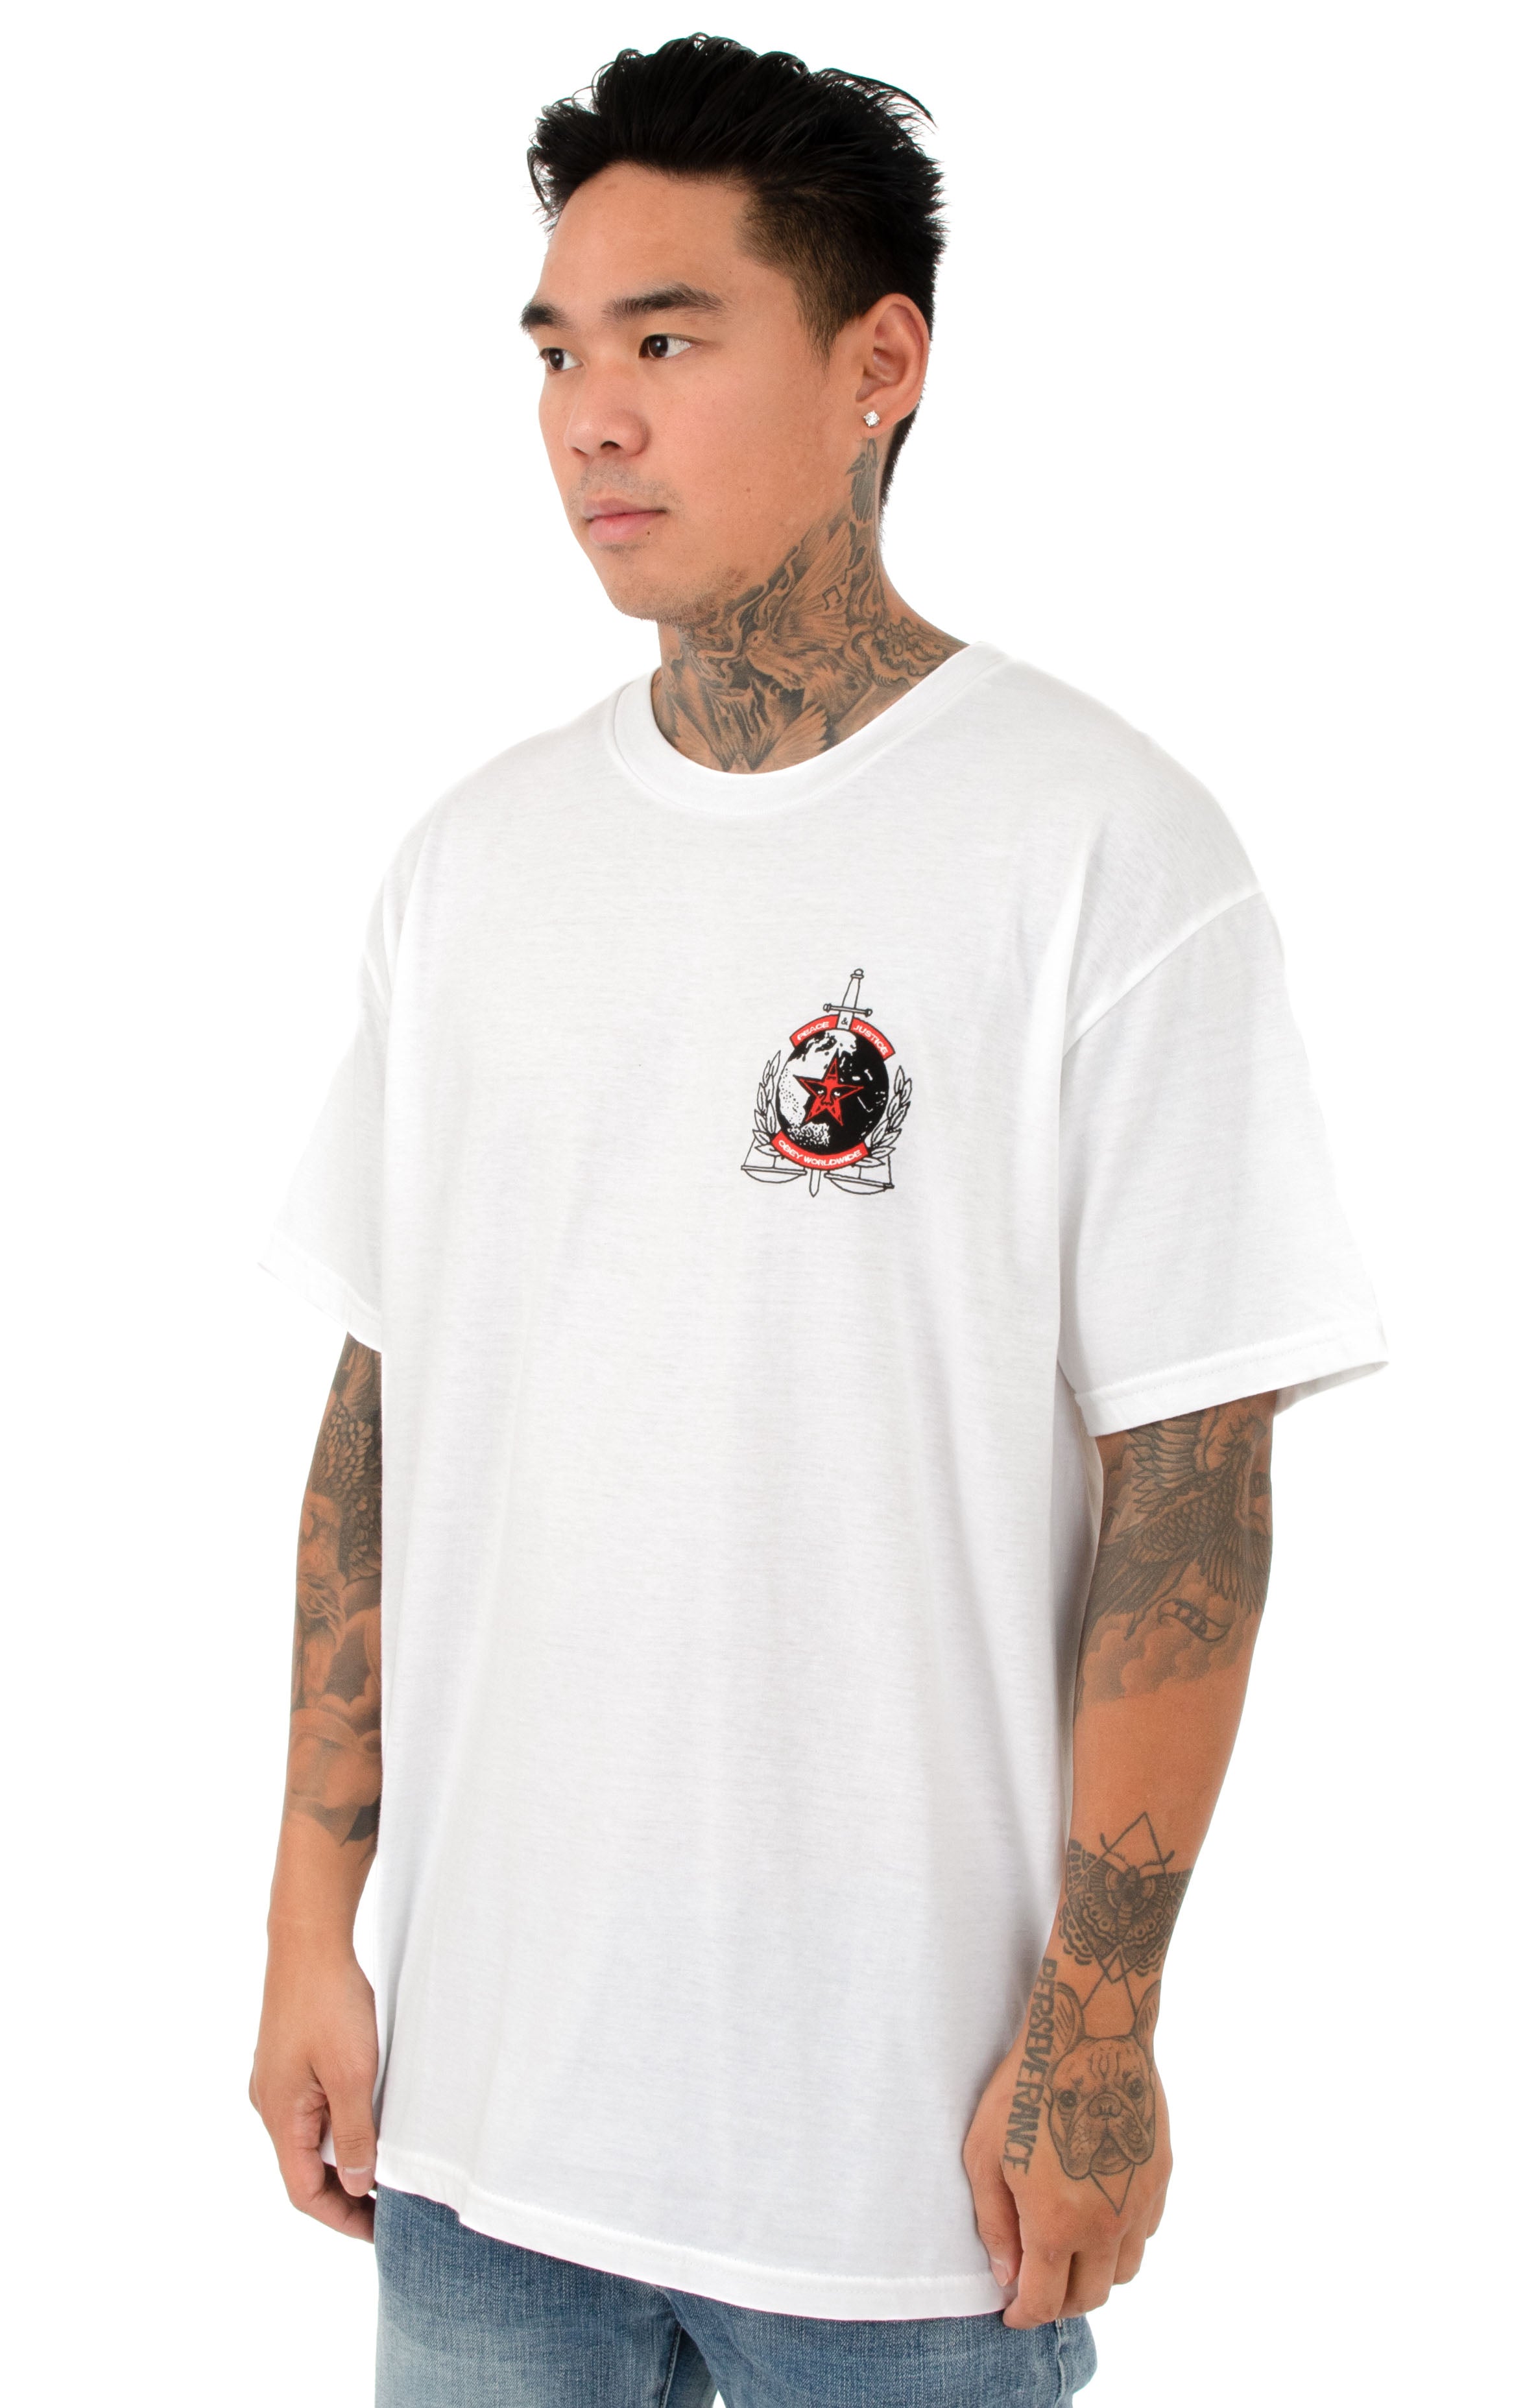 Obey Peace & Justice T-Shirt - White